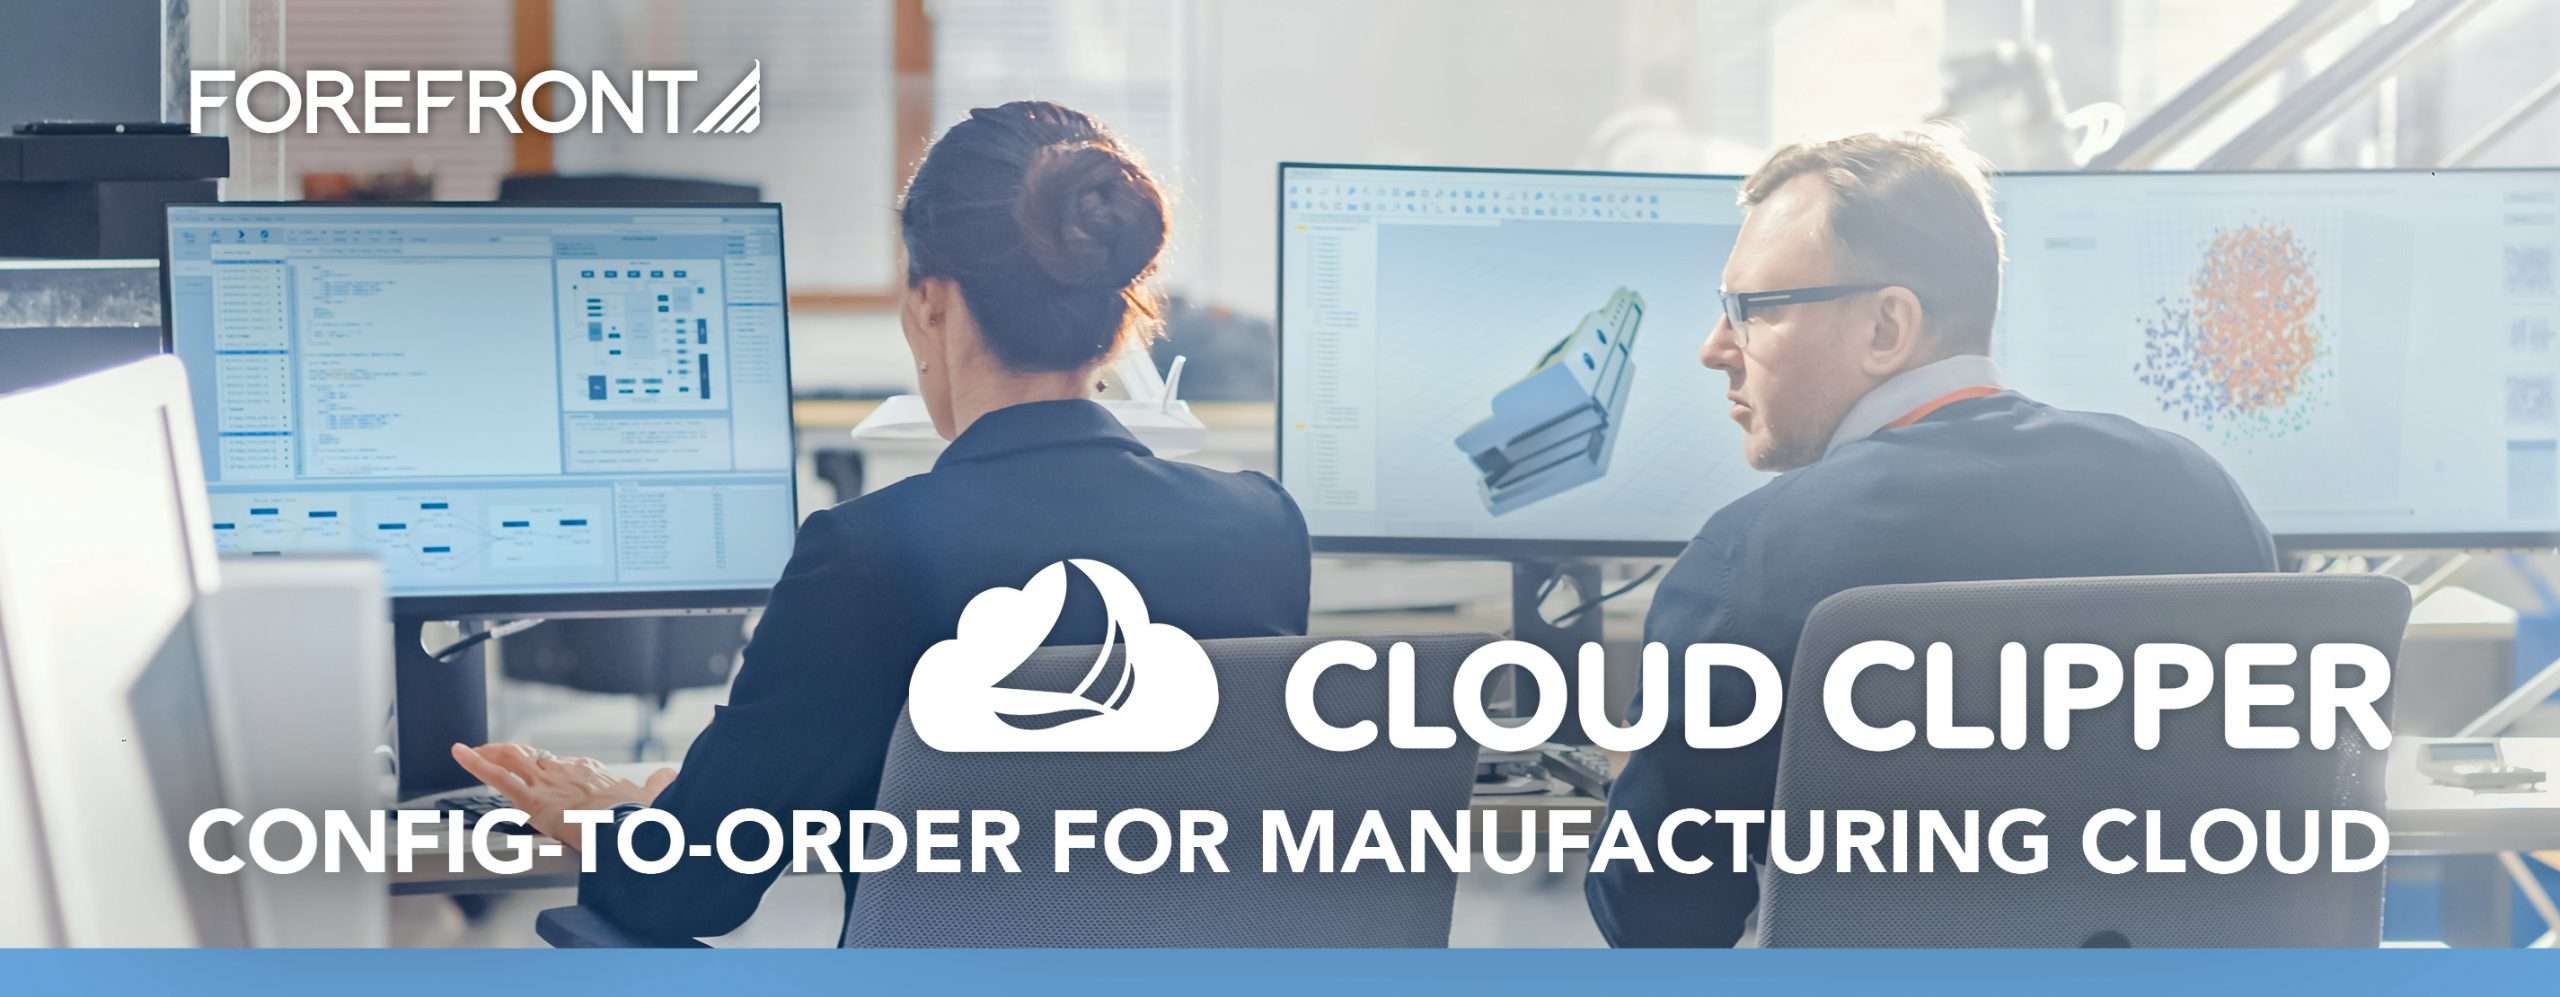 A banner image with a background of two people working on computers. The text reads: Cloud Clipper, Config-to-Order for Manufacturing Cloud"